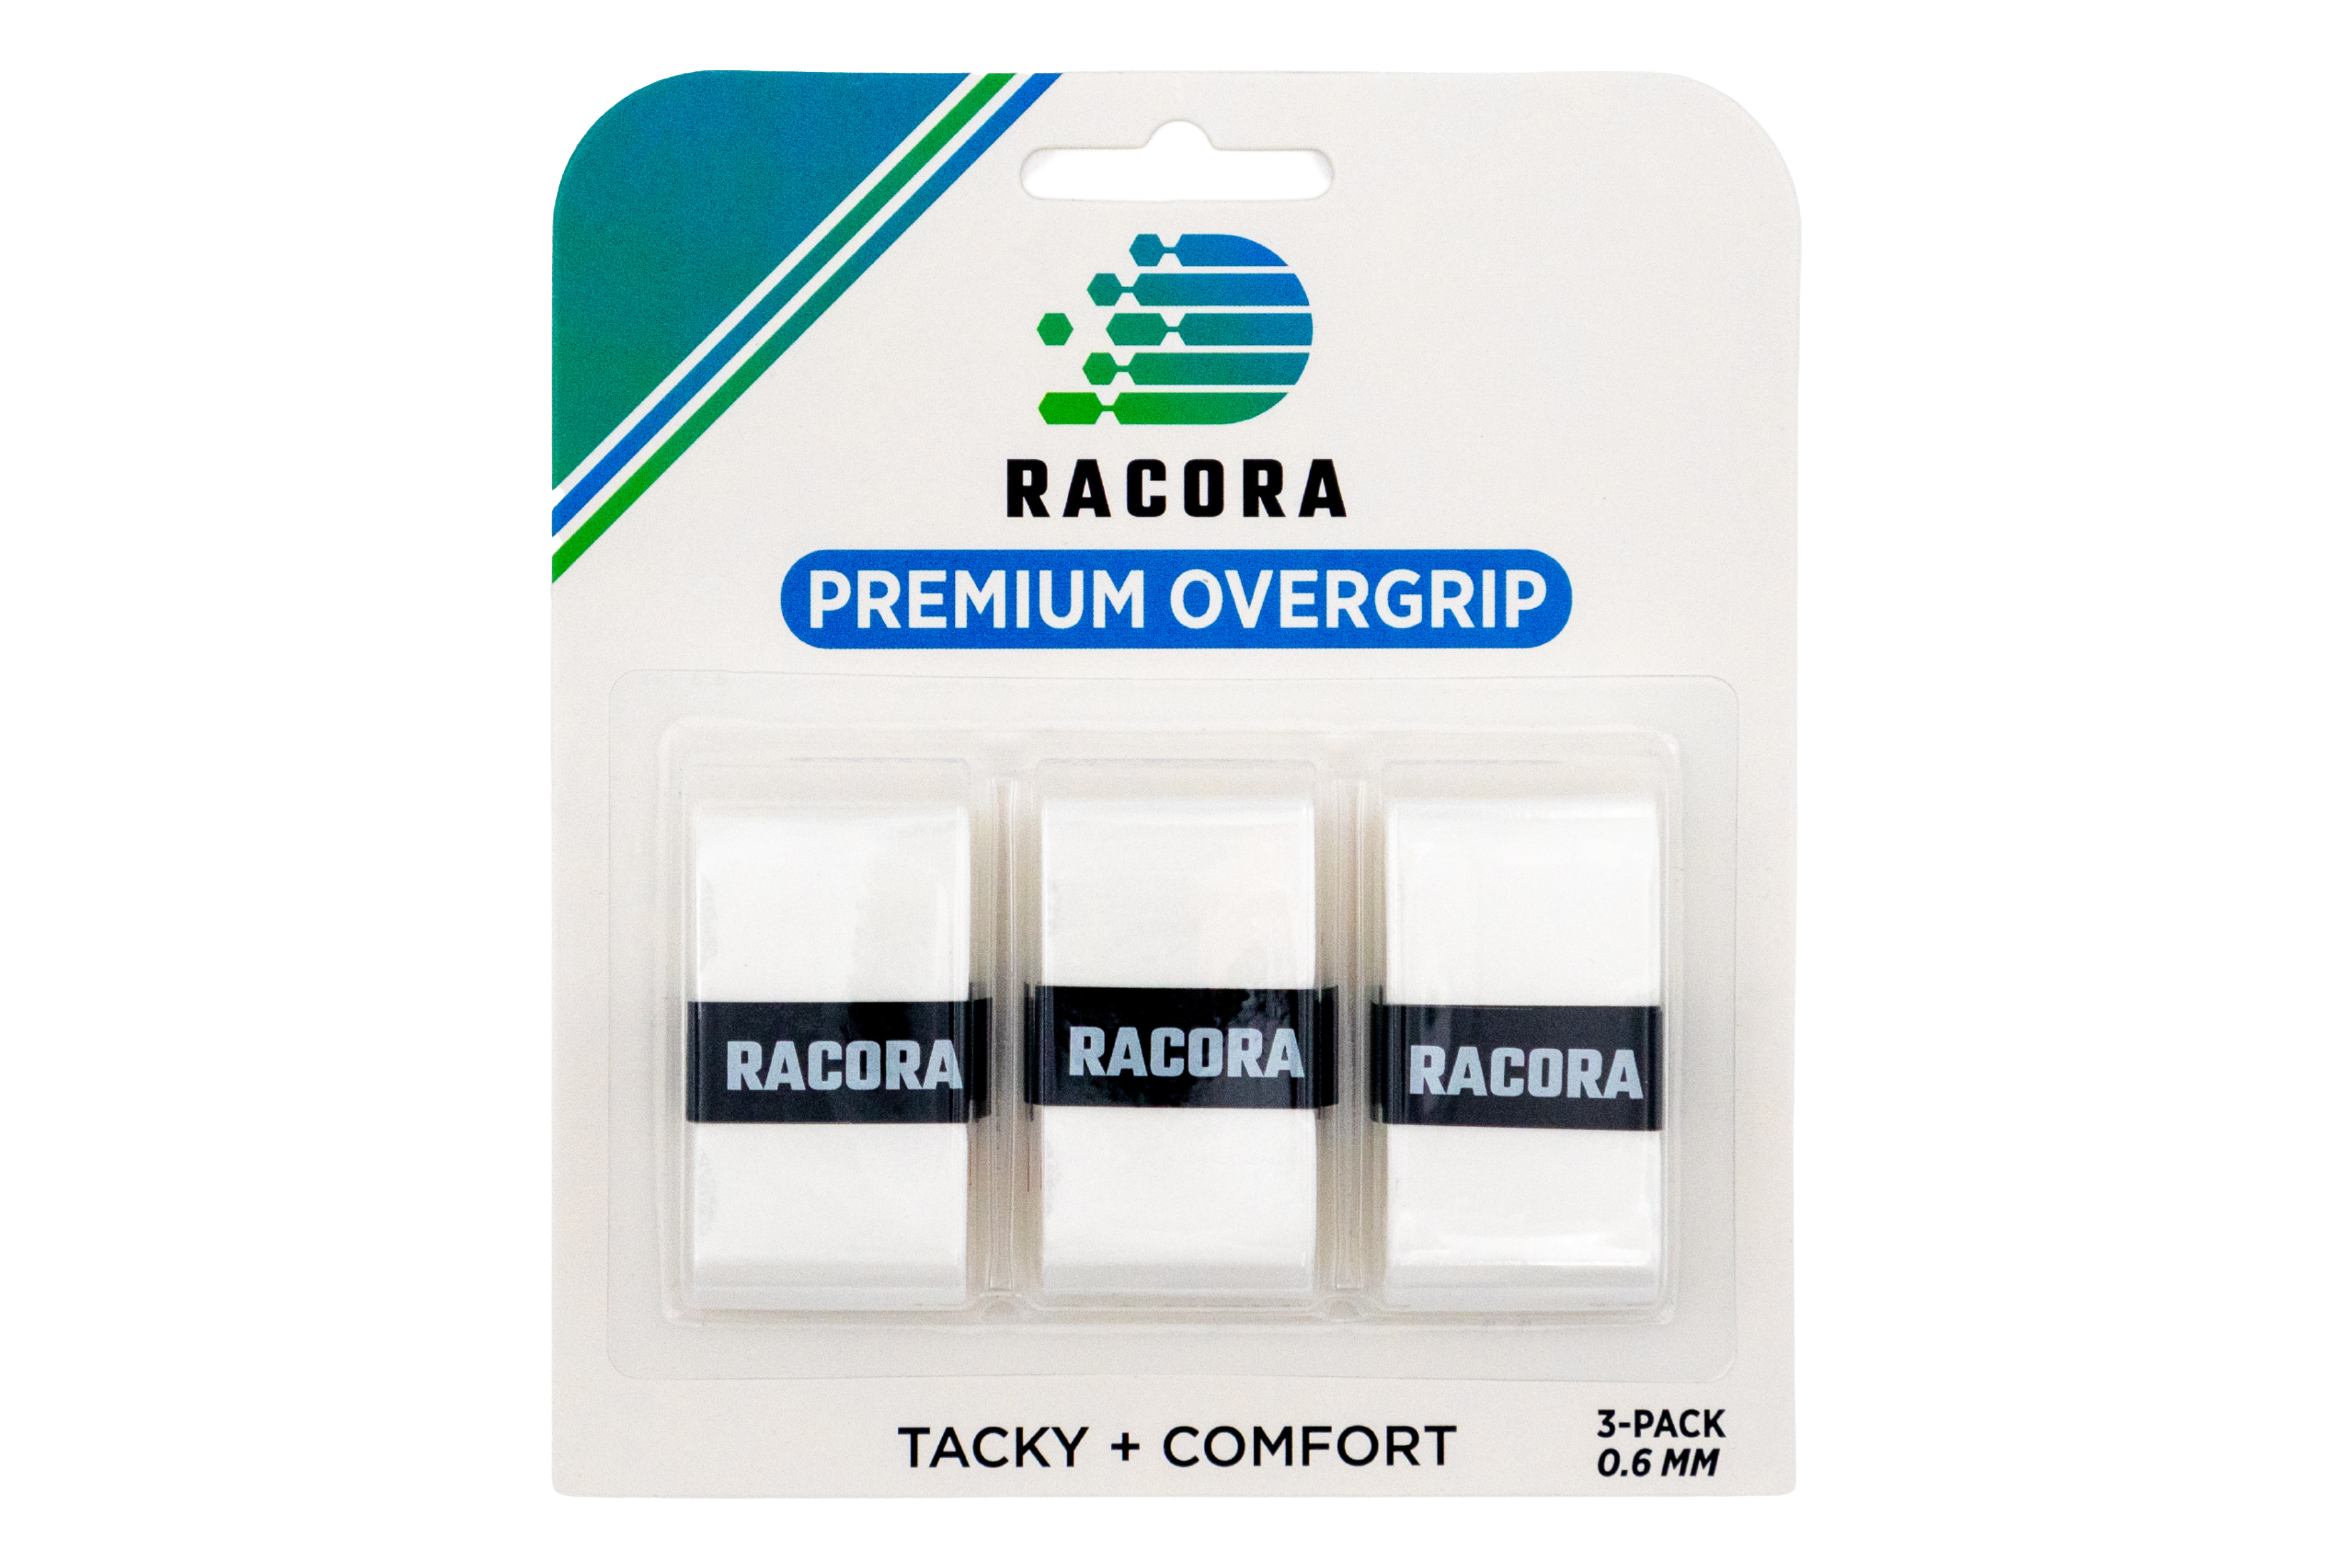 3-Pack of Racora white tennis overgrips